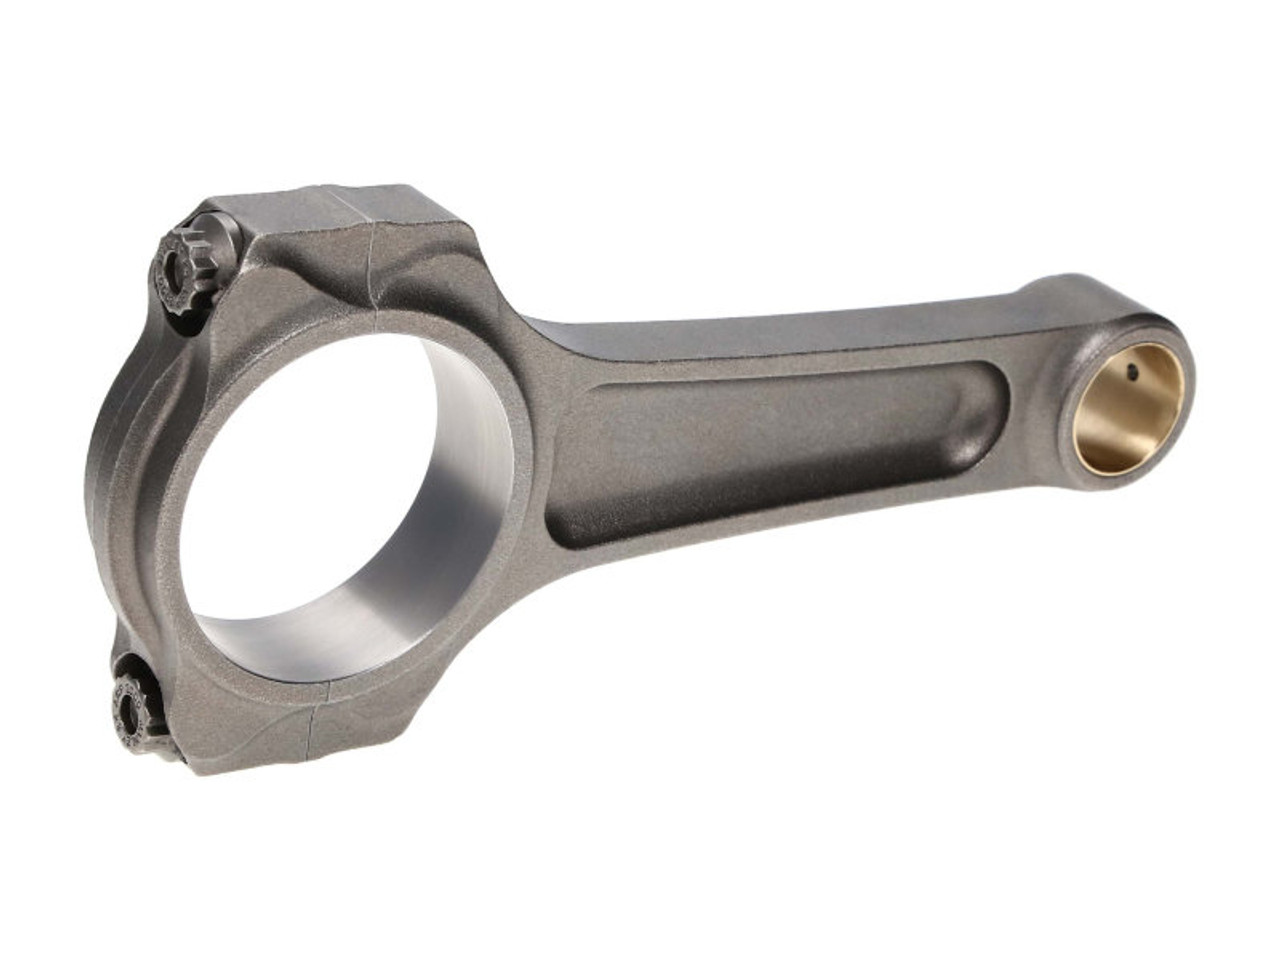 Manley Small Block Chevy .025in Longer LS-1 6.125in Pro Series I Beam Connecting Rod Set - 14359-8 Photo - Primary